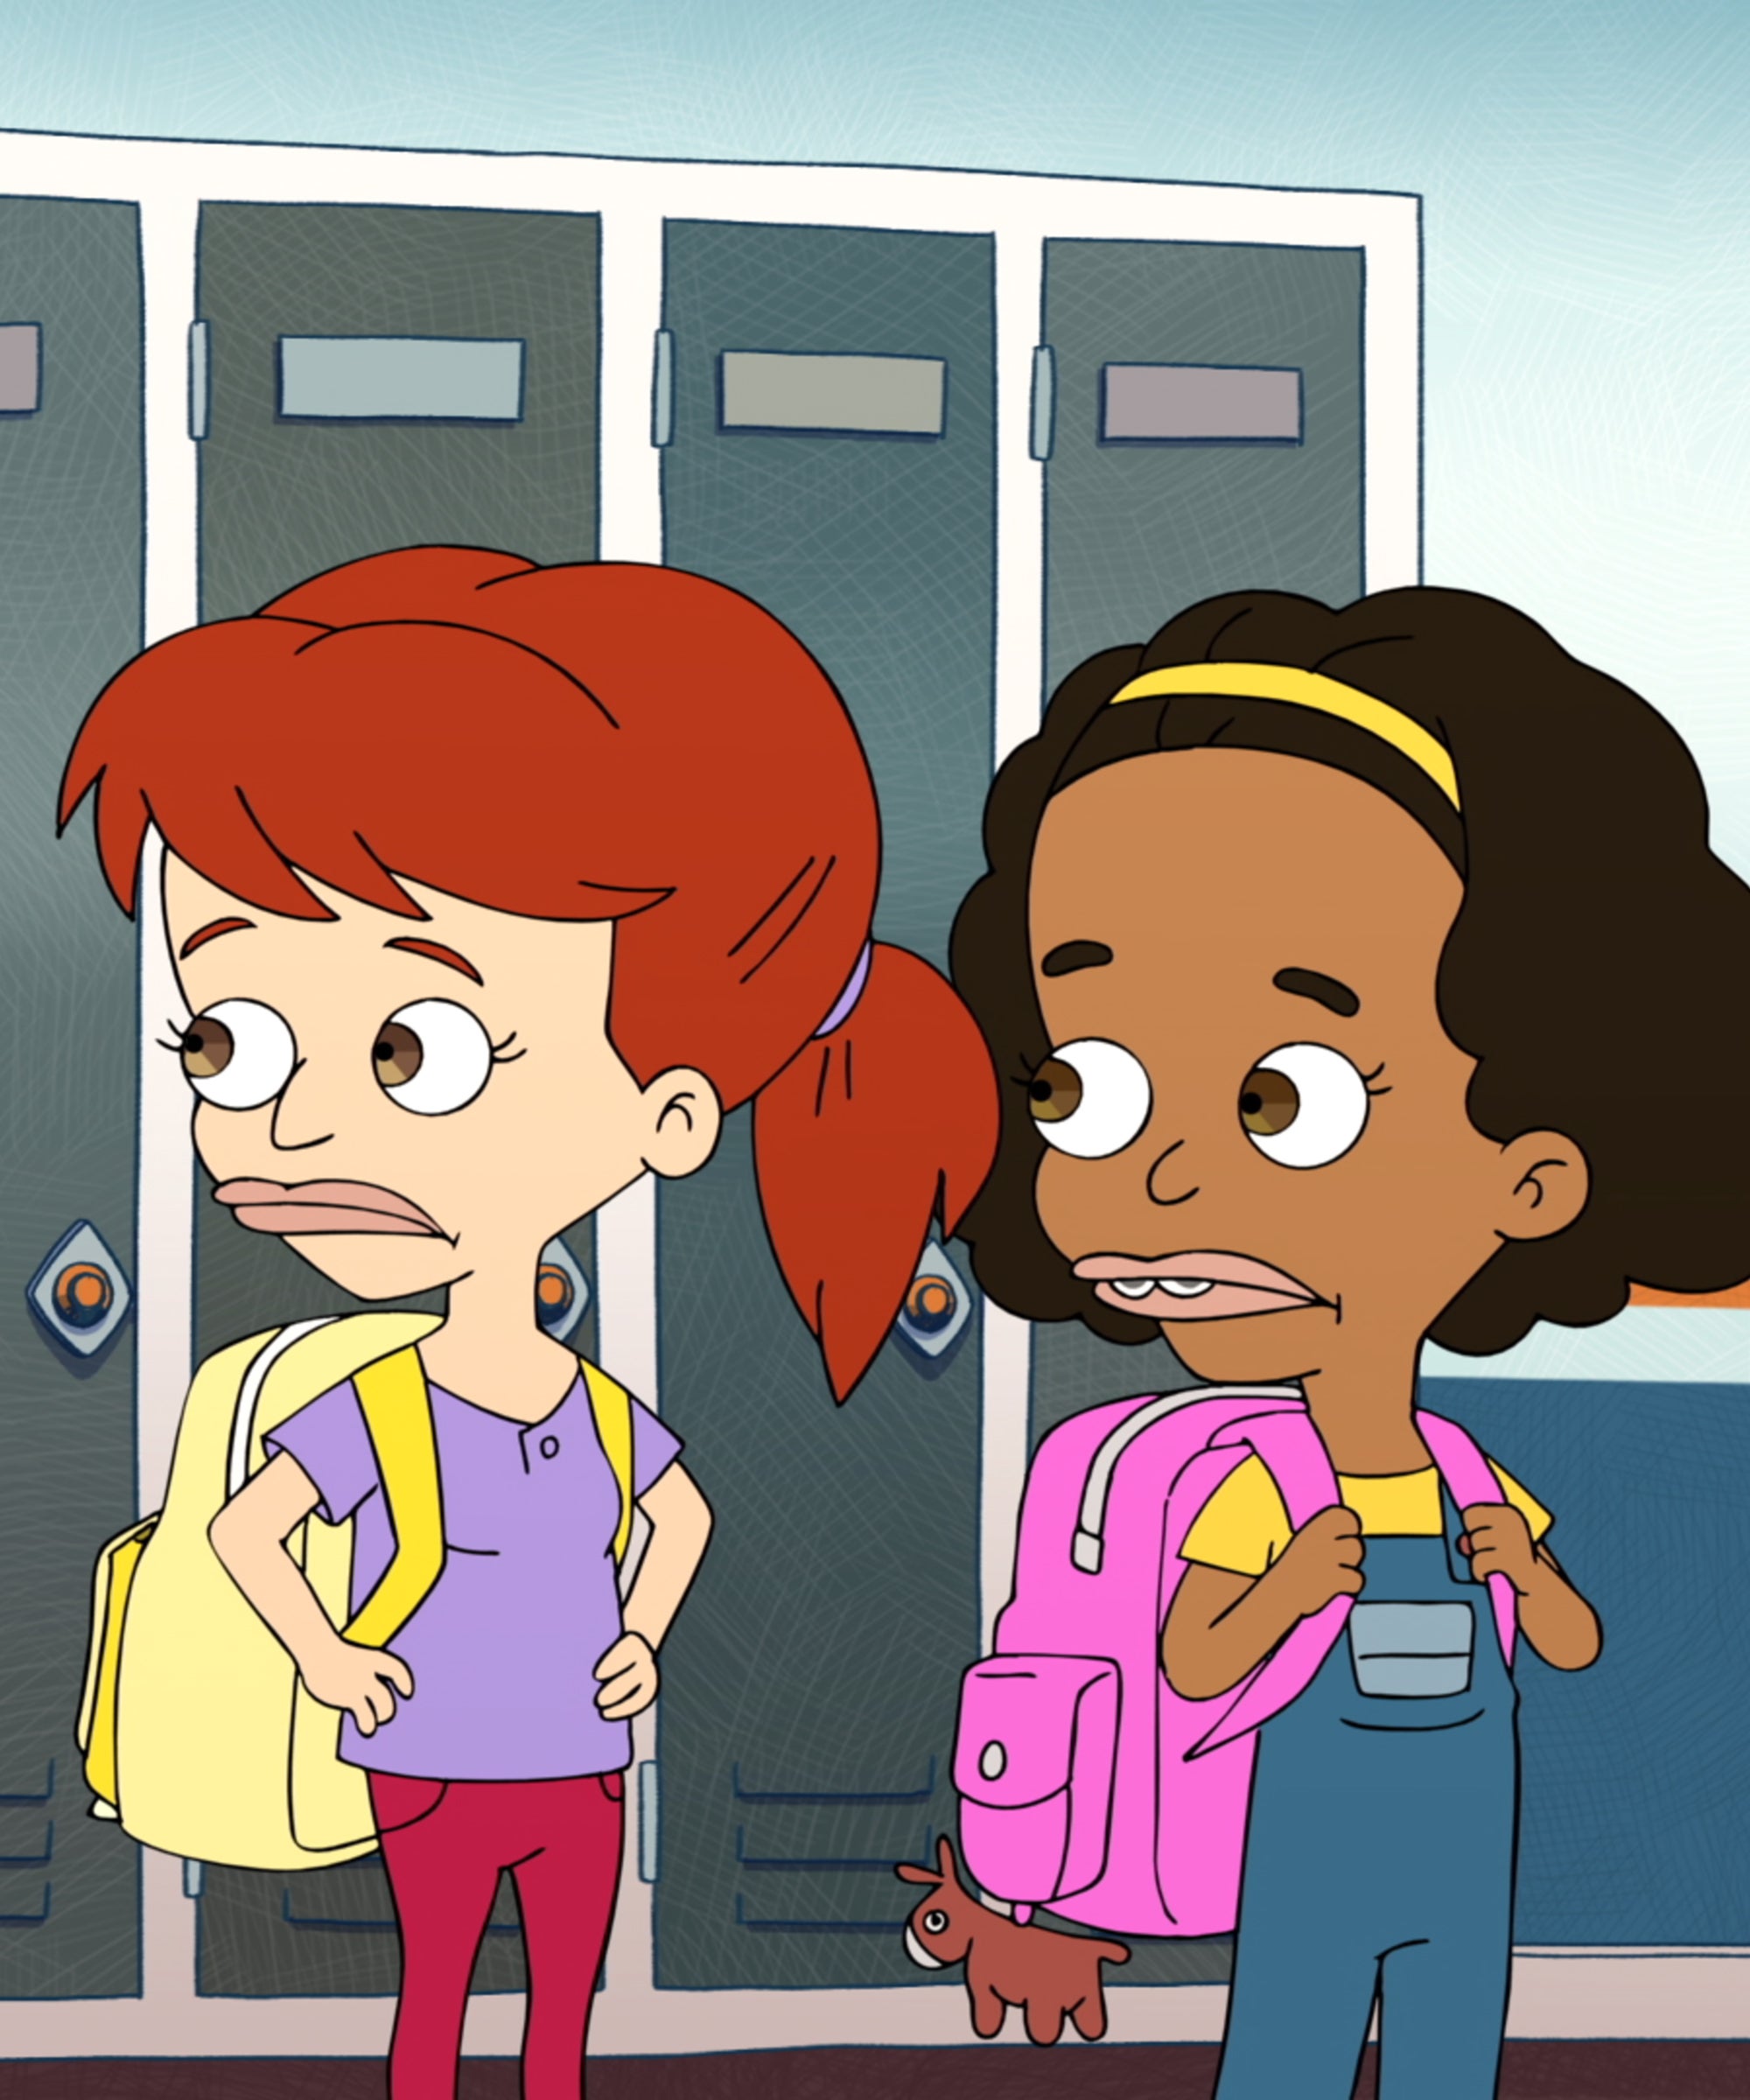 Lola Big Mouth Quotes Big Mouth All 21 Episodes From 1st Seasons Ranked Worst To Best